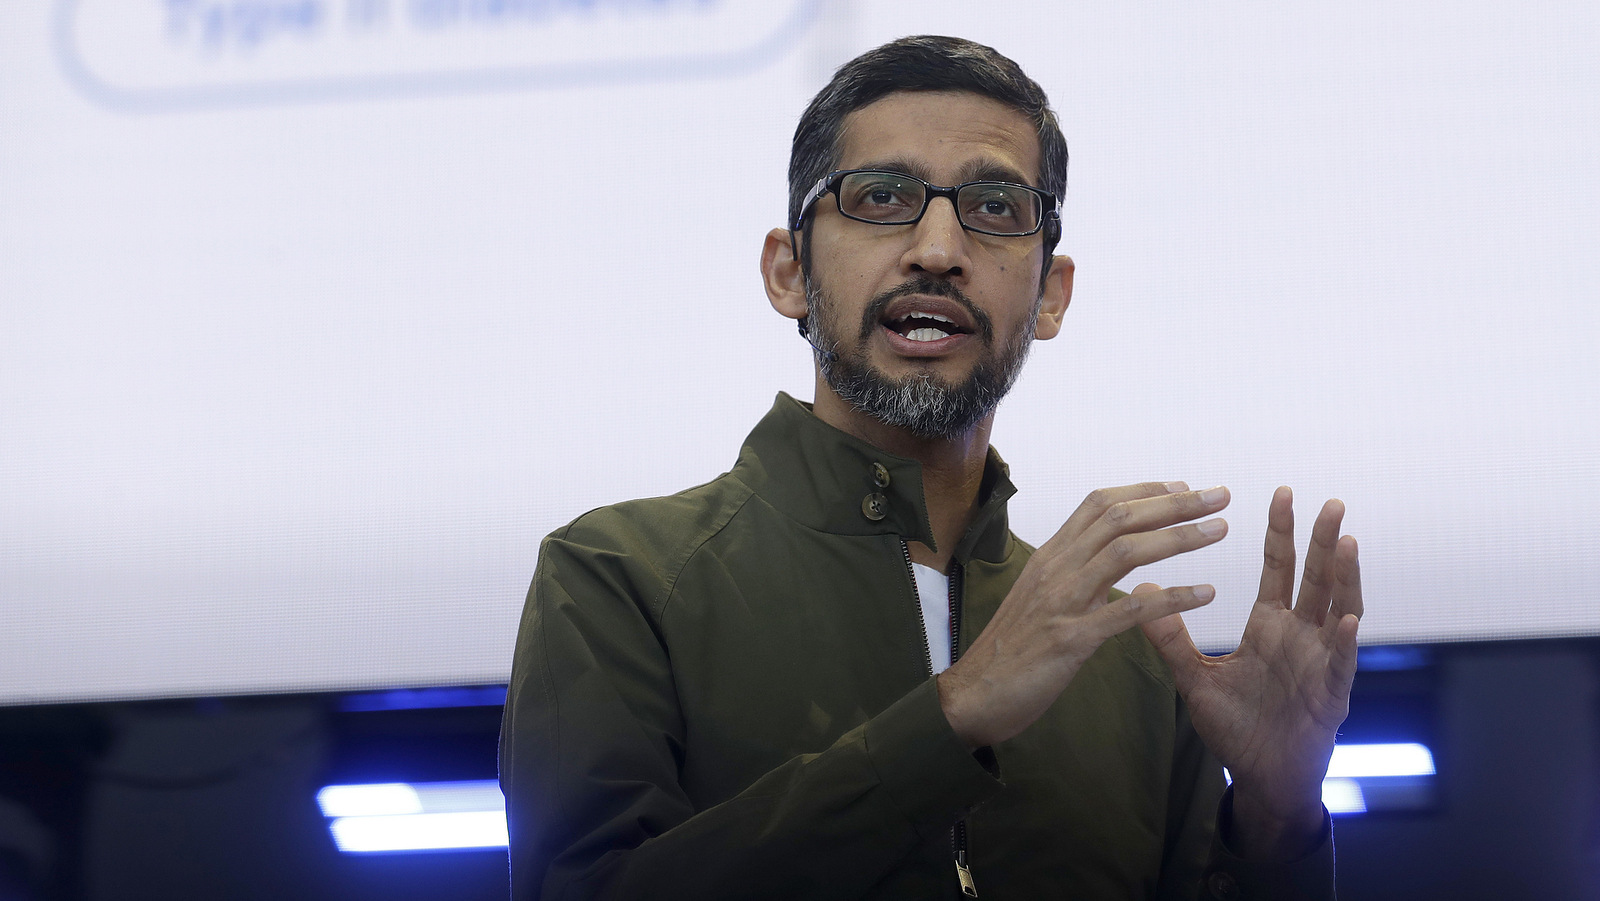 Google CEO Sundar Pichai pledges that it will not use artificial intelligence in applications related to weapons or surveillance at the Google I/O conference in Mountain View, Calif. May 8, 2018. Jeff Chiu | AP